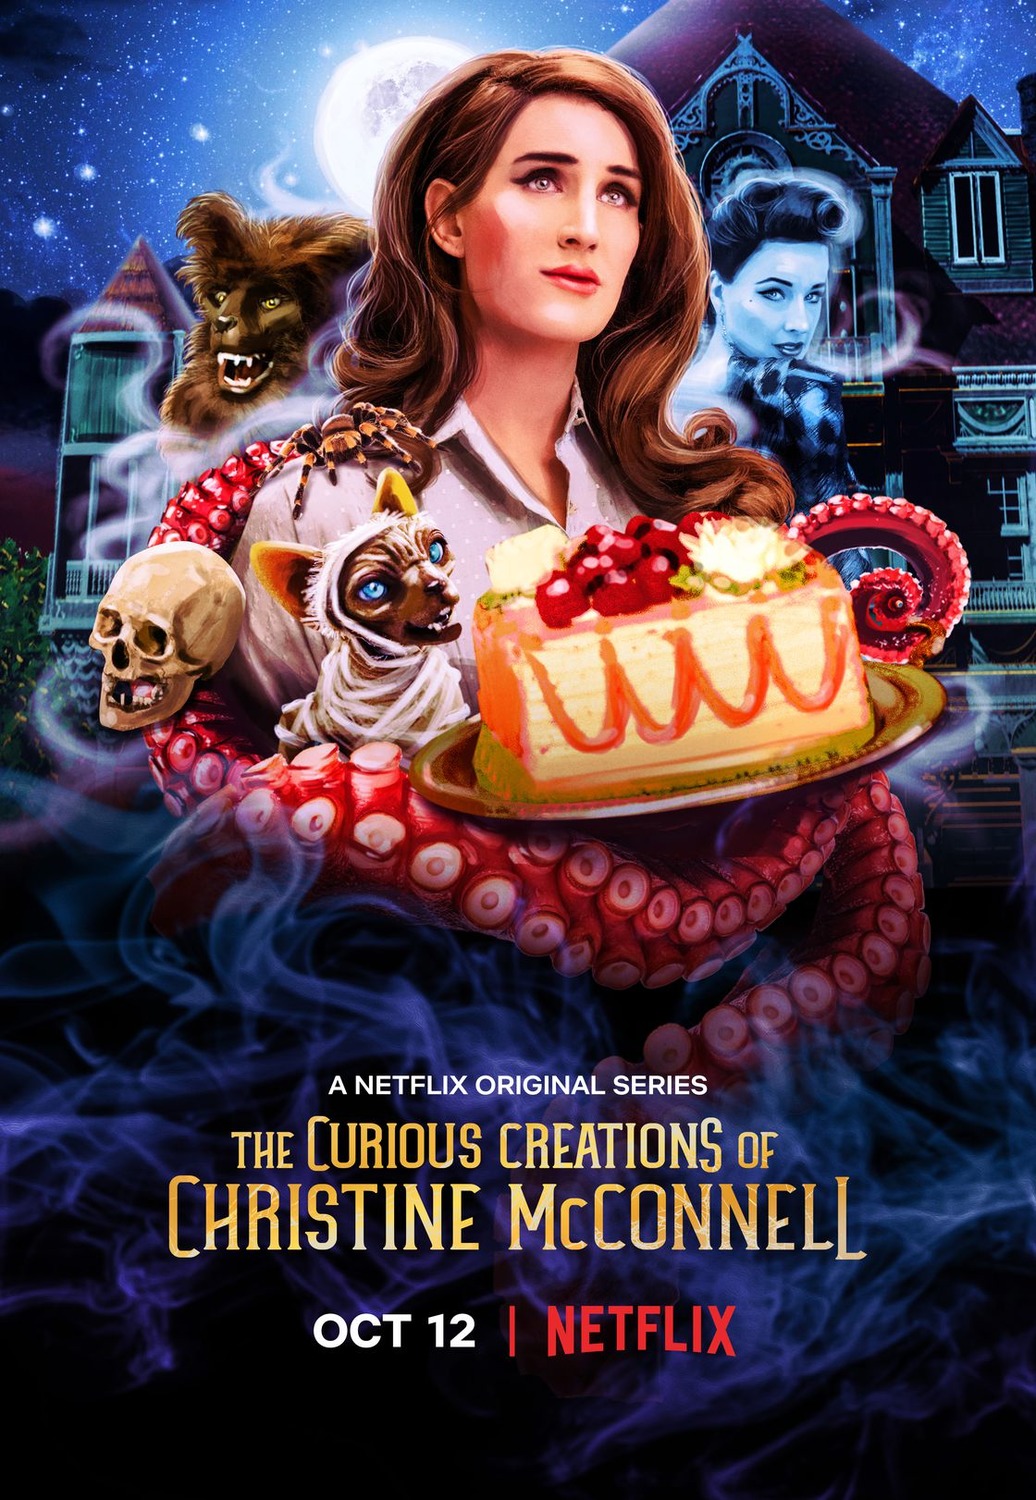 Extra Large TV Poster Image for The Curious Creations of Christine McConnell 